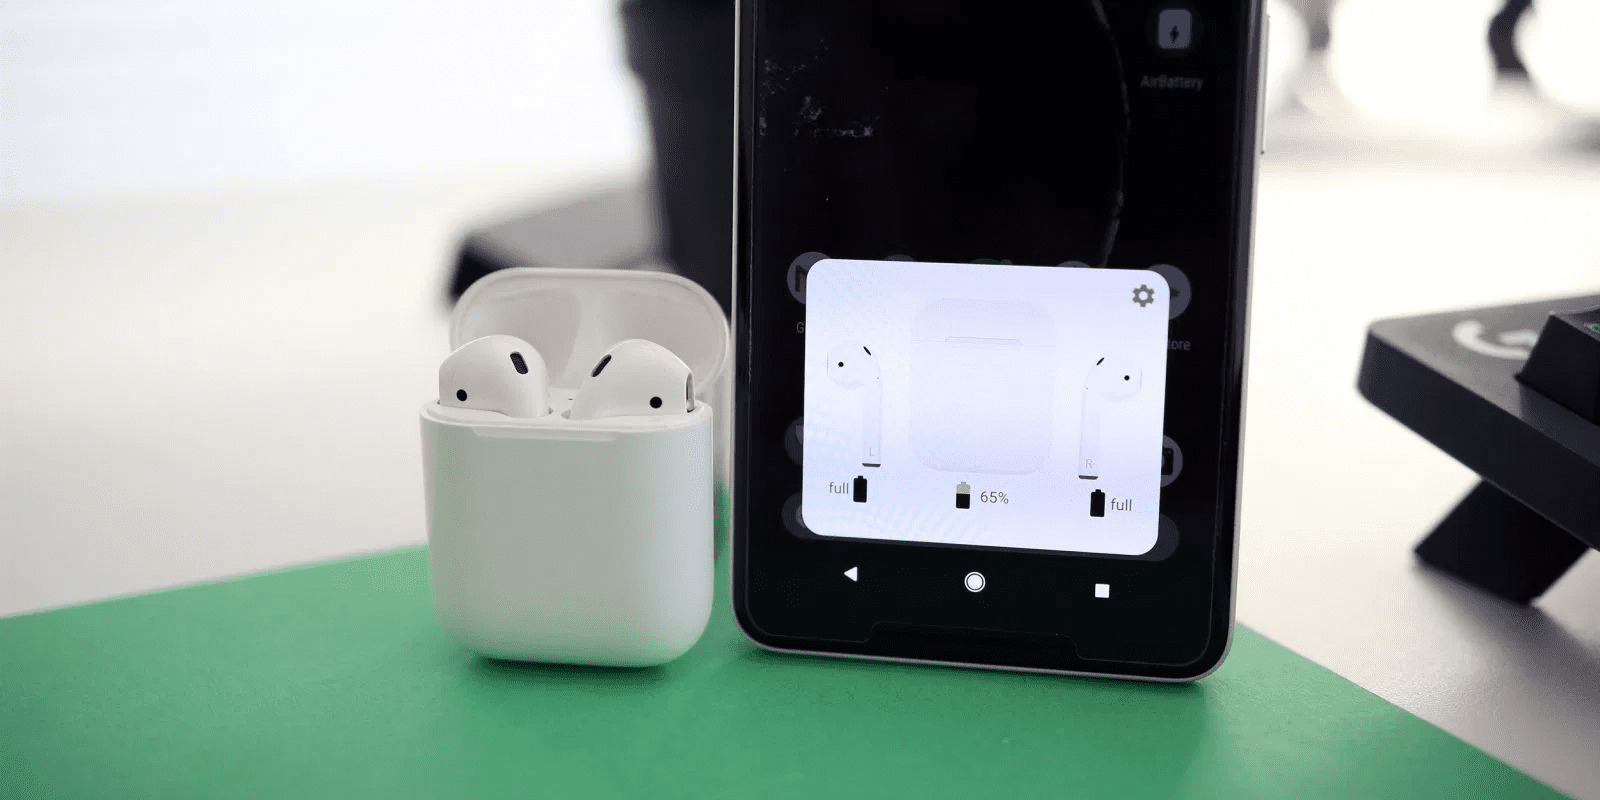 Will Airpods work with android How to connect